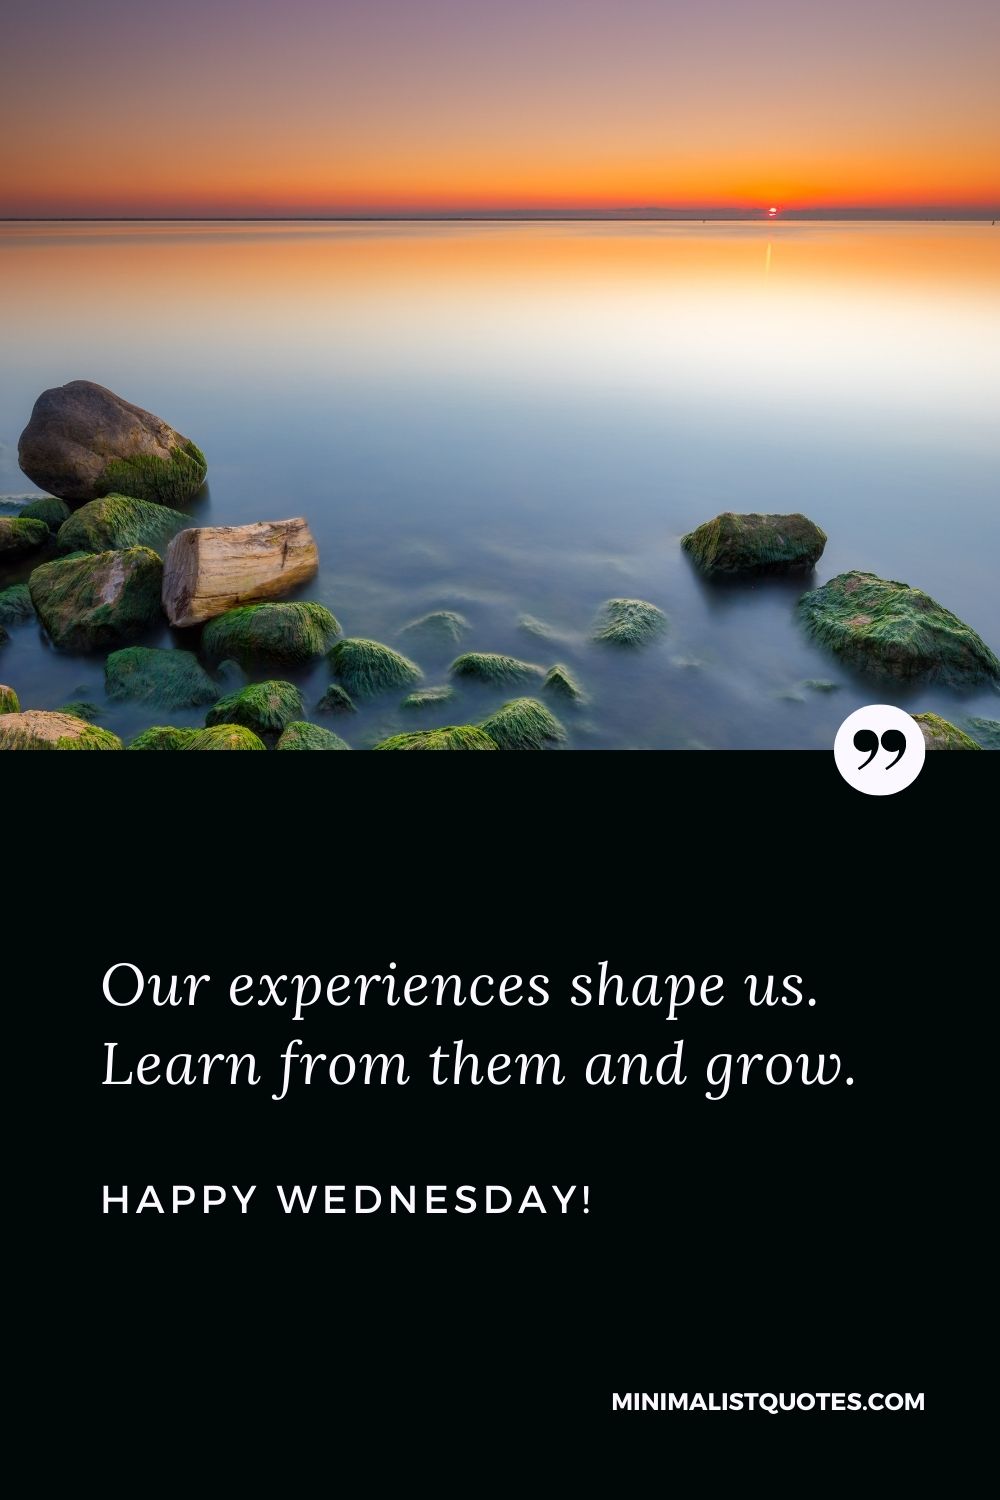 Our experiences shape us. Learn from them and grow. Happy Wednesday!